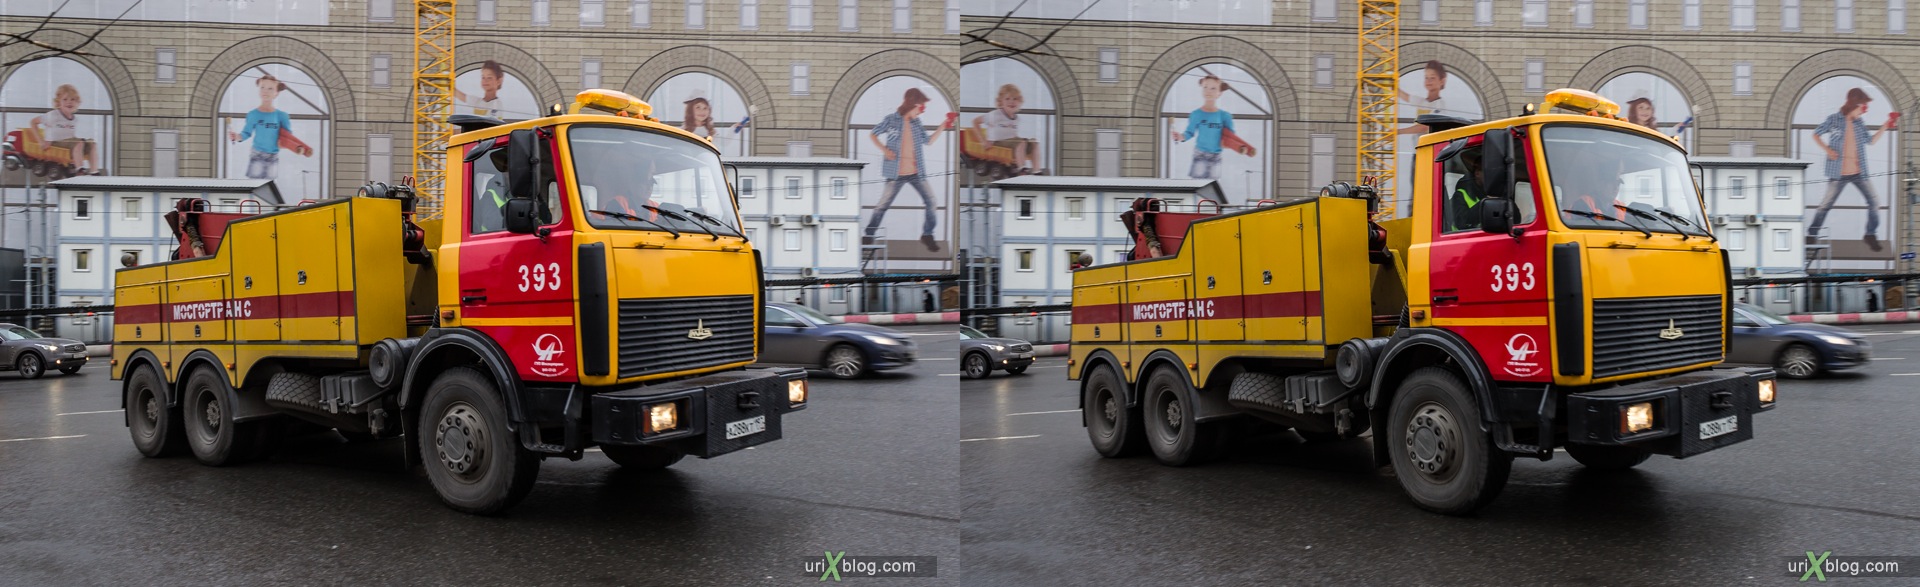 2013, Moscow, parade, old, ancient, trolleybus, street, Lubjanskaja square, 3D, stereo pair, cross-eyed, crossview, cross view stereo pair, stereoscopic